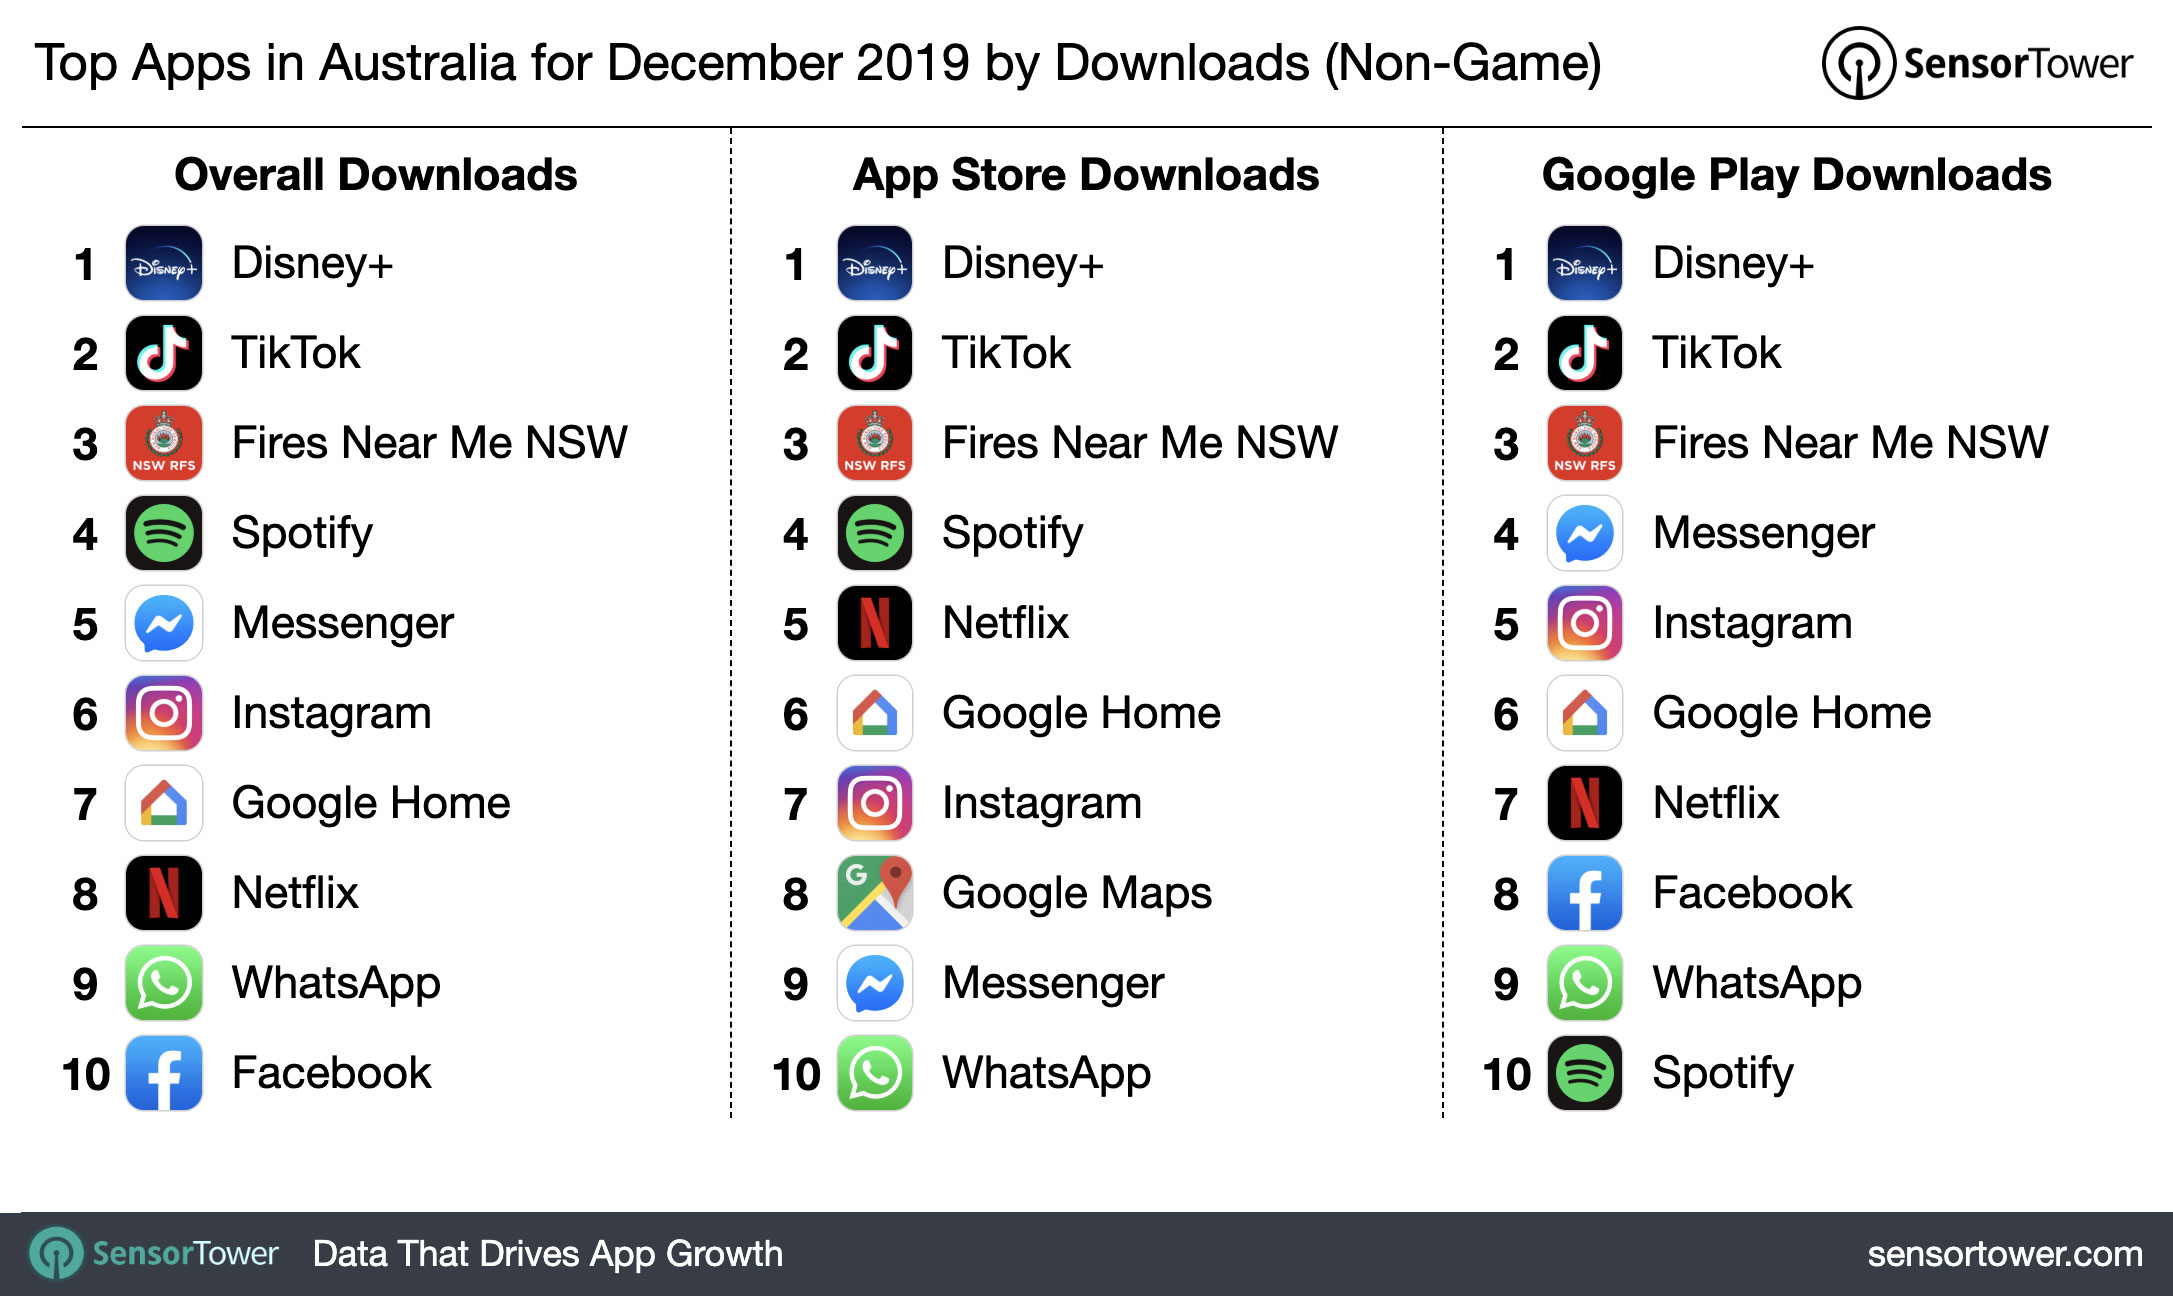 Top Apps in Australia for December 2019 by Downloads